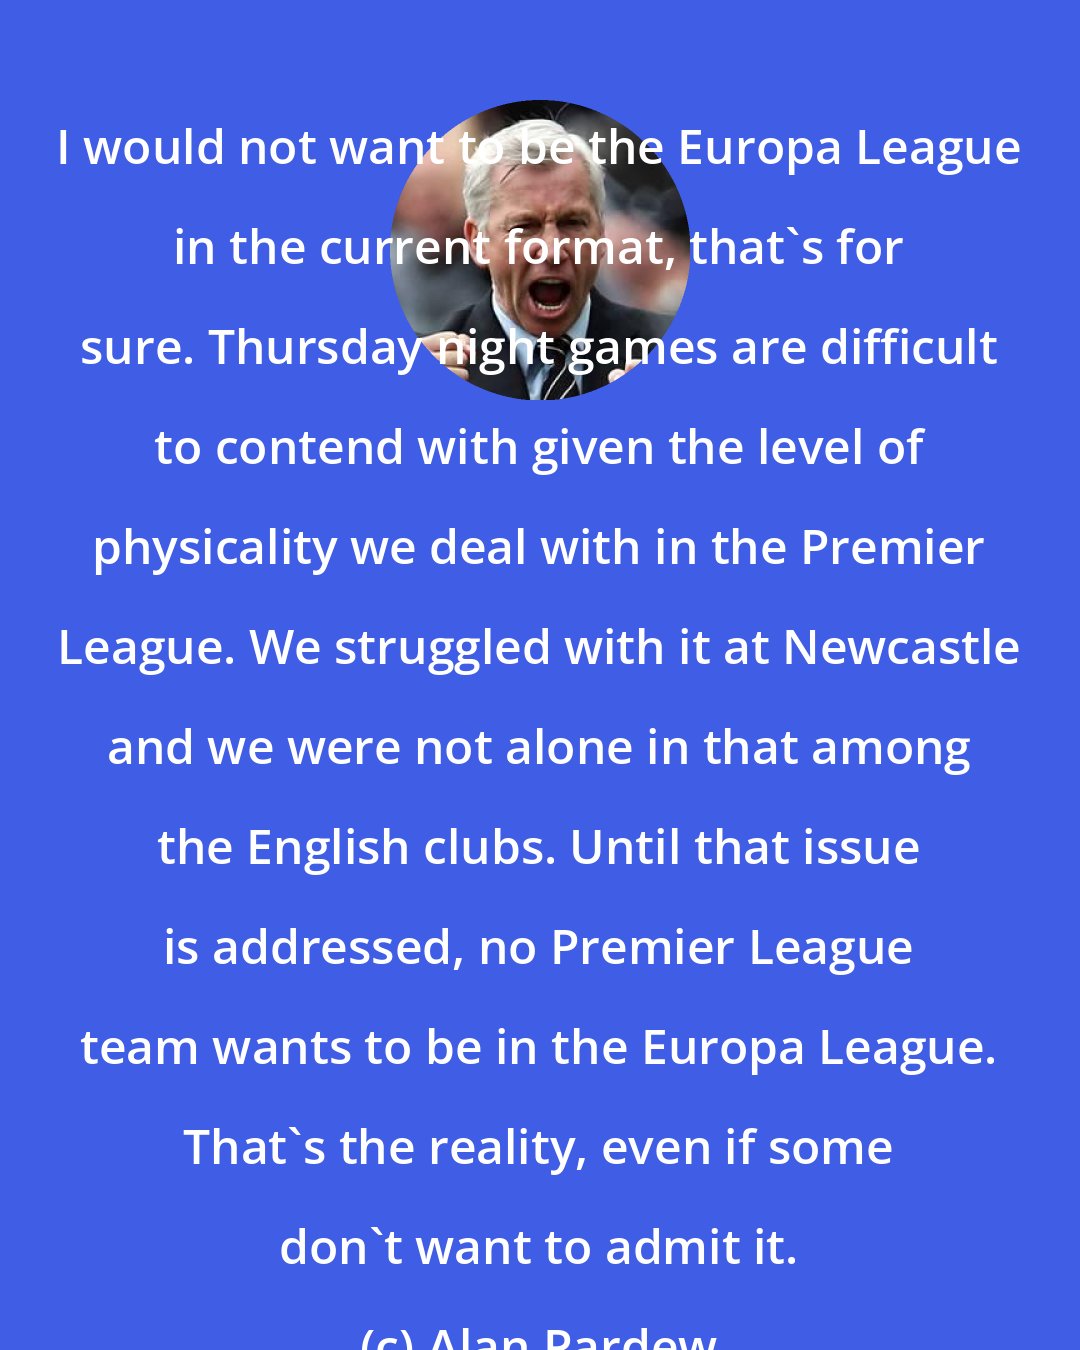 Alan Pardew: I would not want to be the Europa League in the current format, that's for sure. Thursday night games are difficult to contend with given the level of physicality we deal with in the Premier League. We struggled with it at Newcastle and we were not alone in that among the English clubs. Until that issue is addressed, no Premier League team wants to be in the Europa League. That's the reality, even if some don't want to admit it.